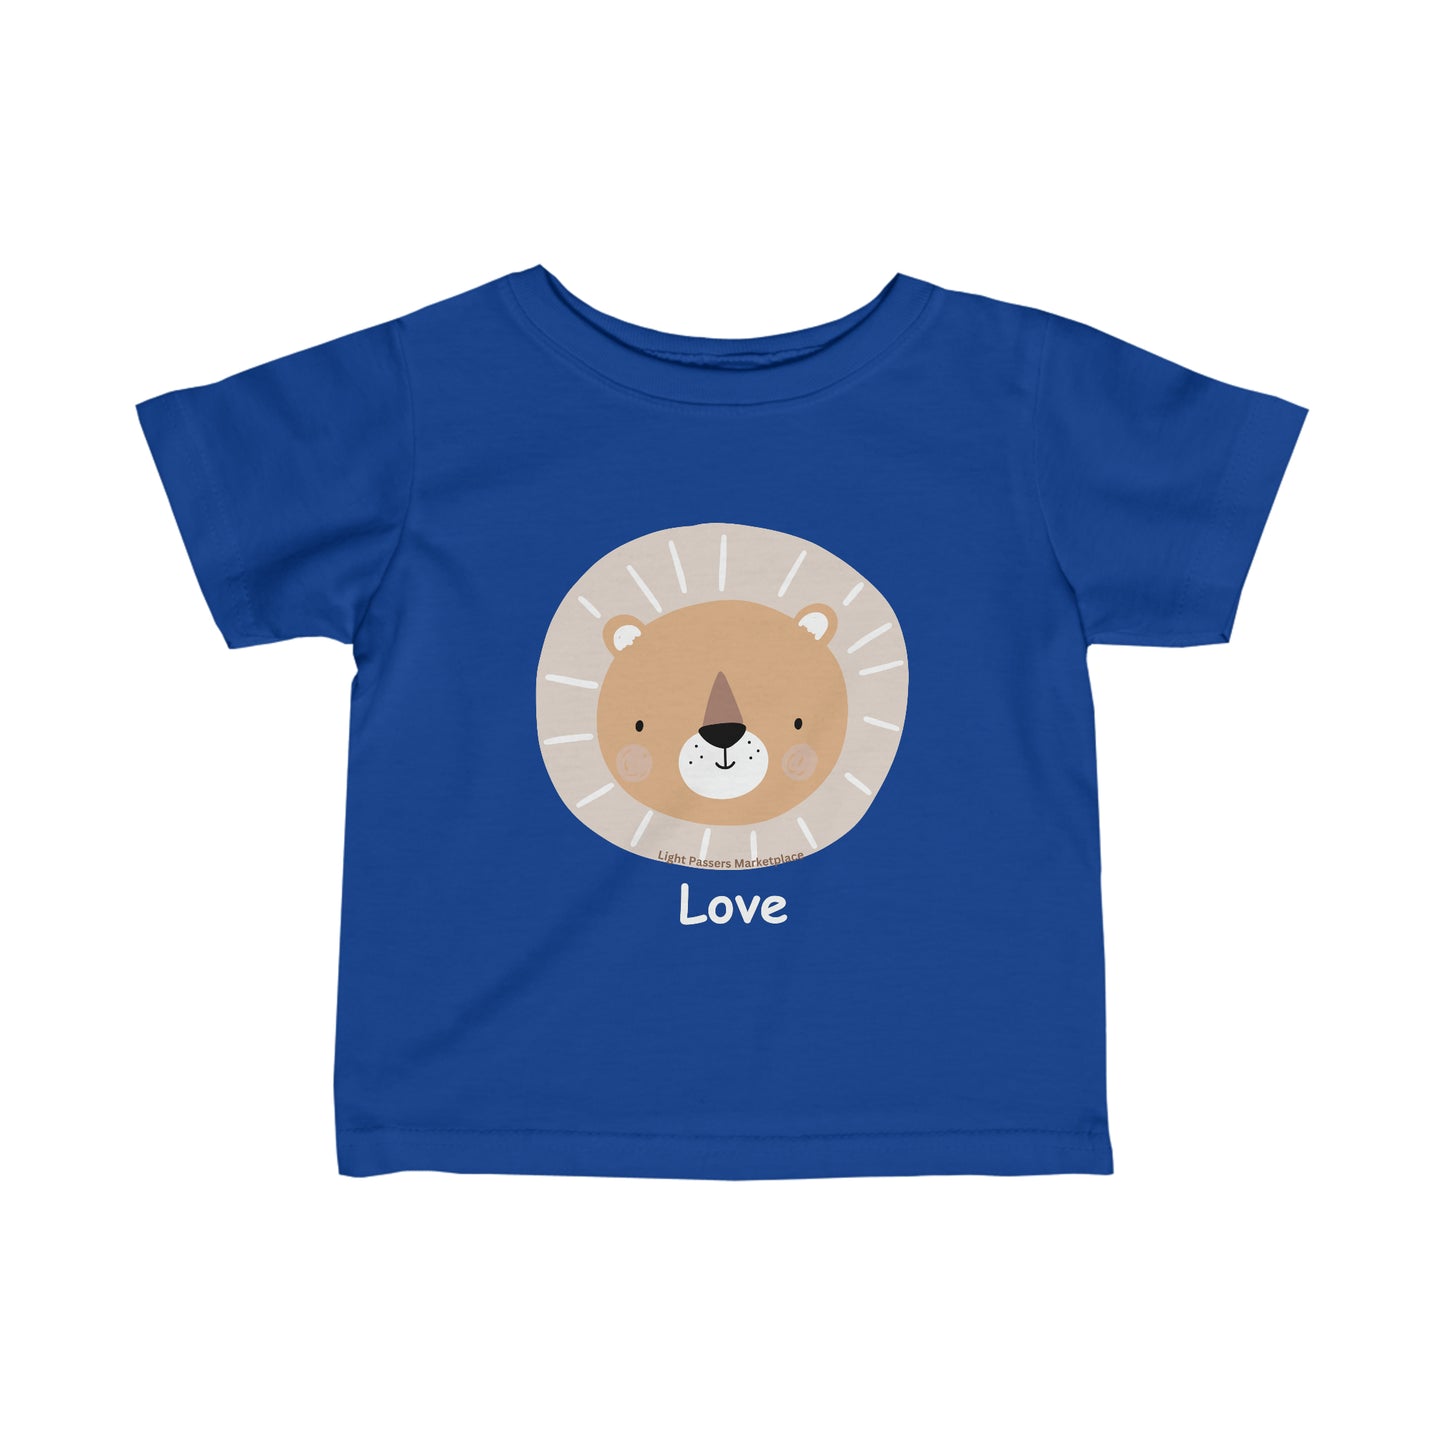 Light Passers Marketplace Lion Love Baby T-shirt Inspirational Messages, Simple Messages, Mental Health